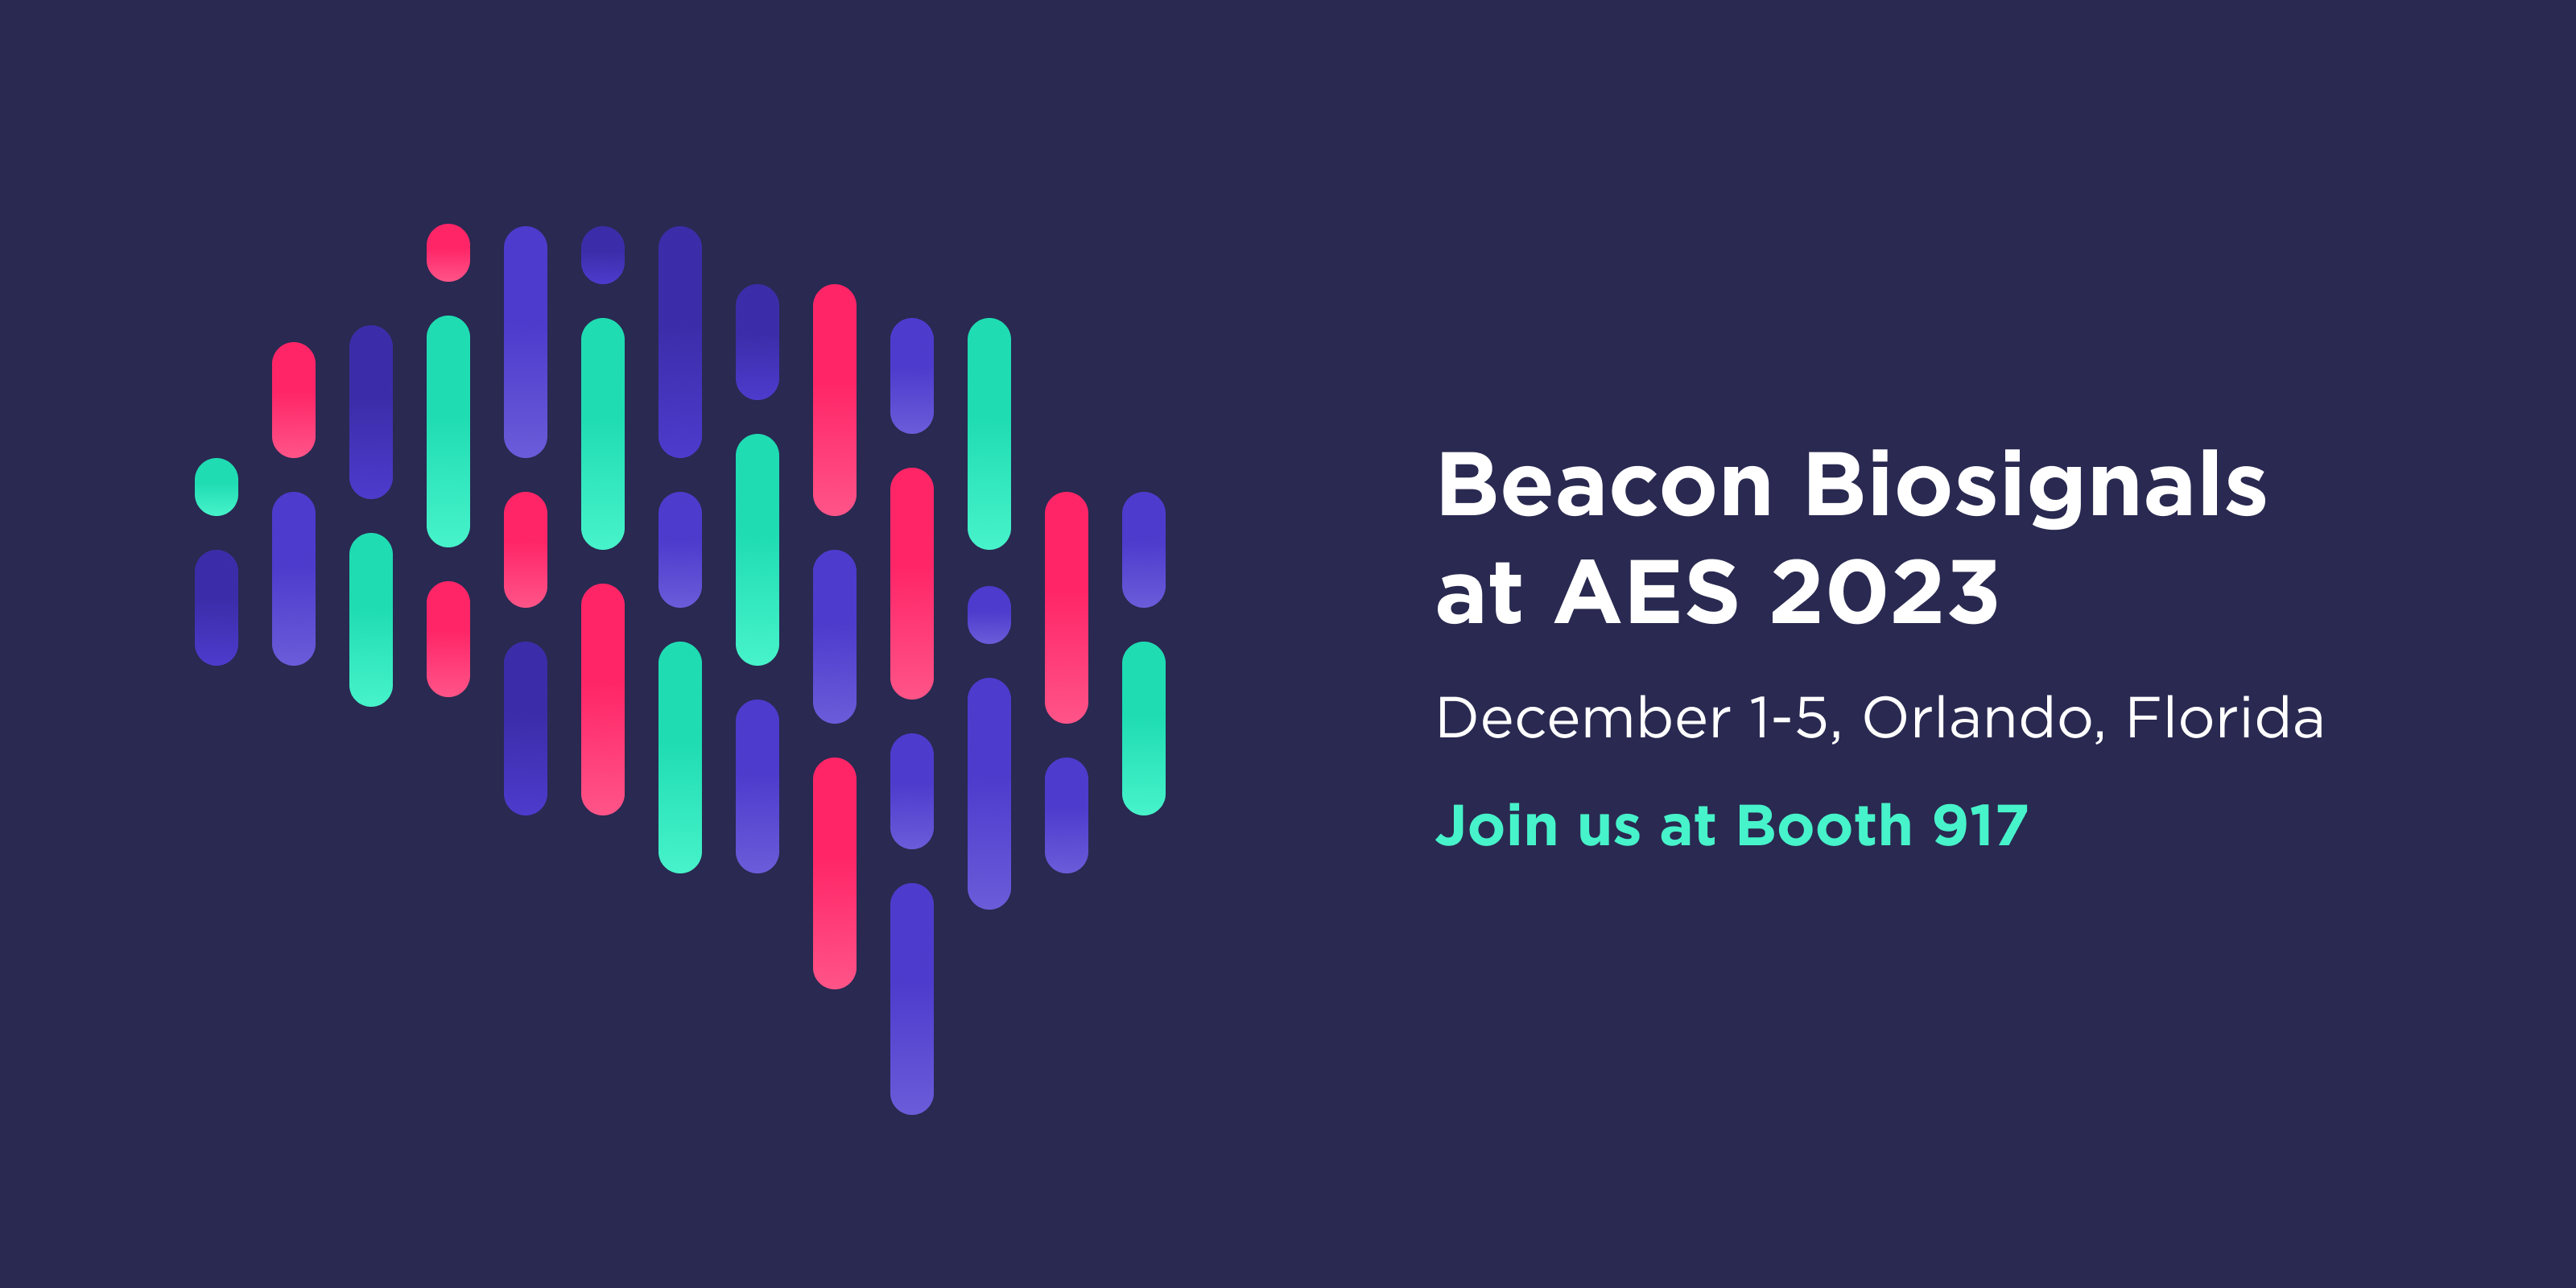 Beacon Biosignals at AES 2023, Booth 917